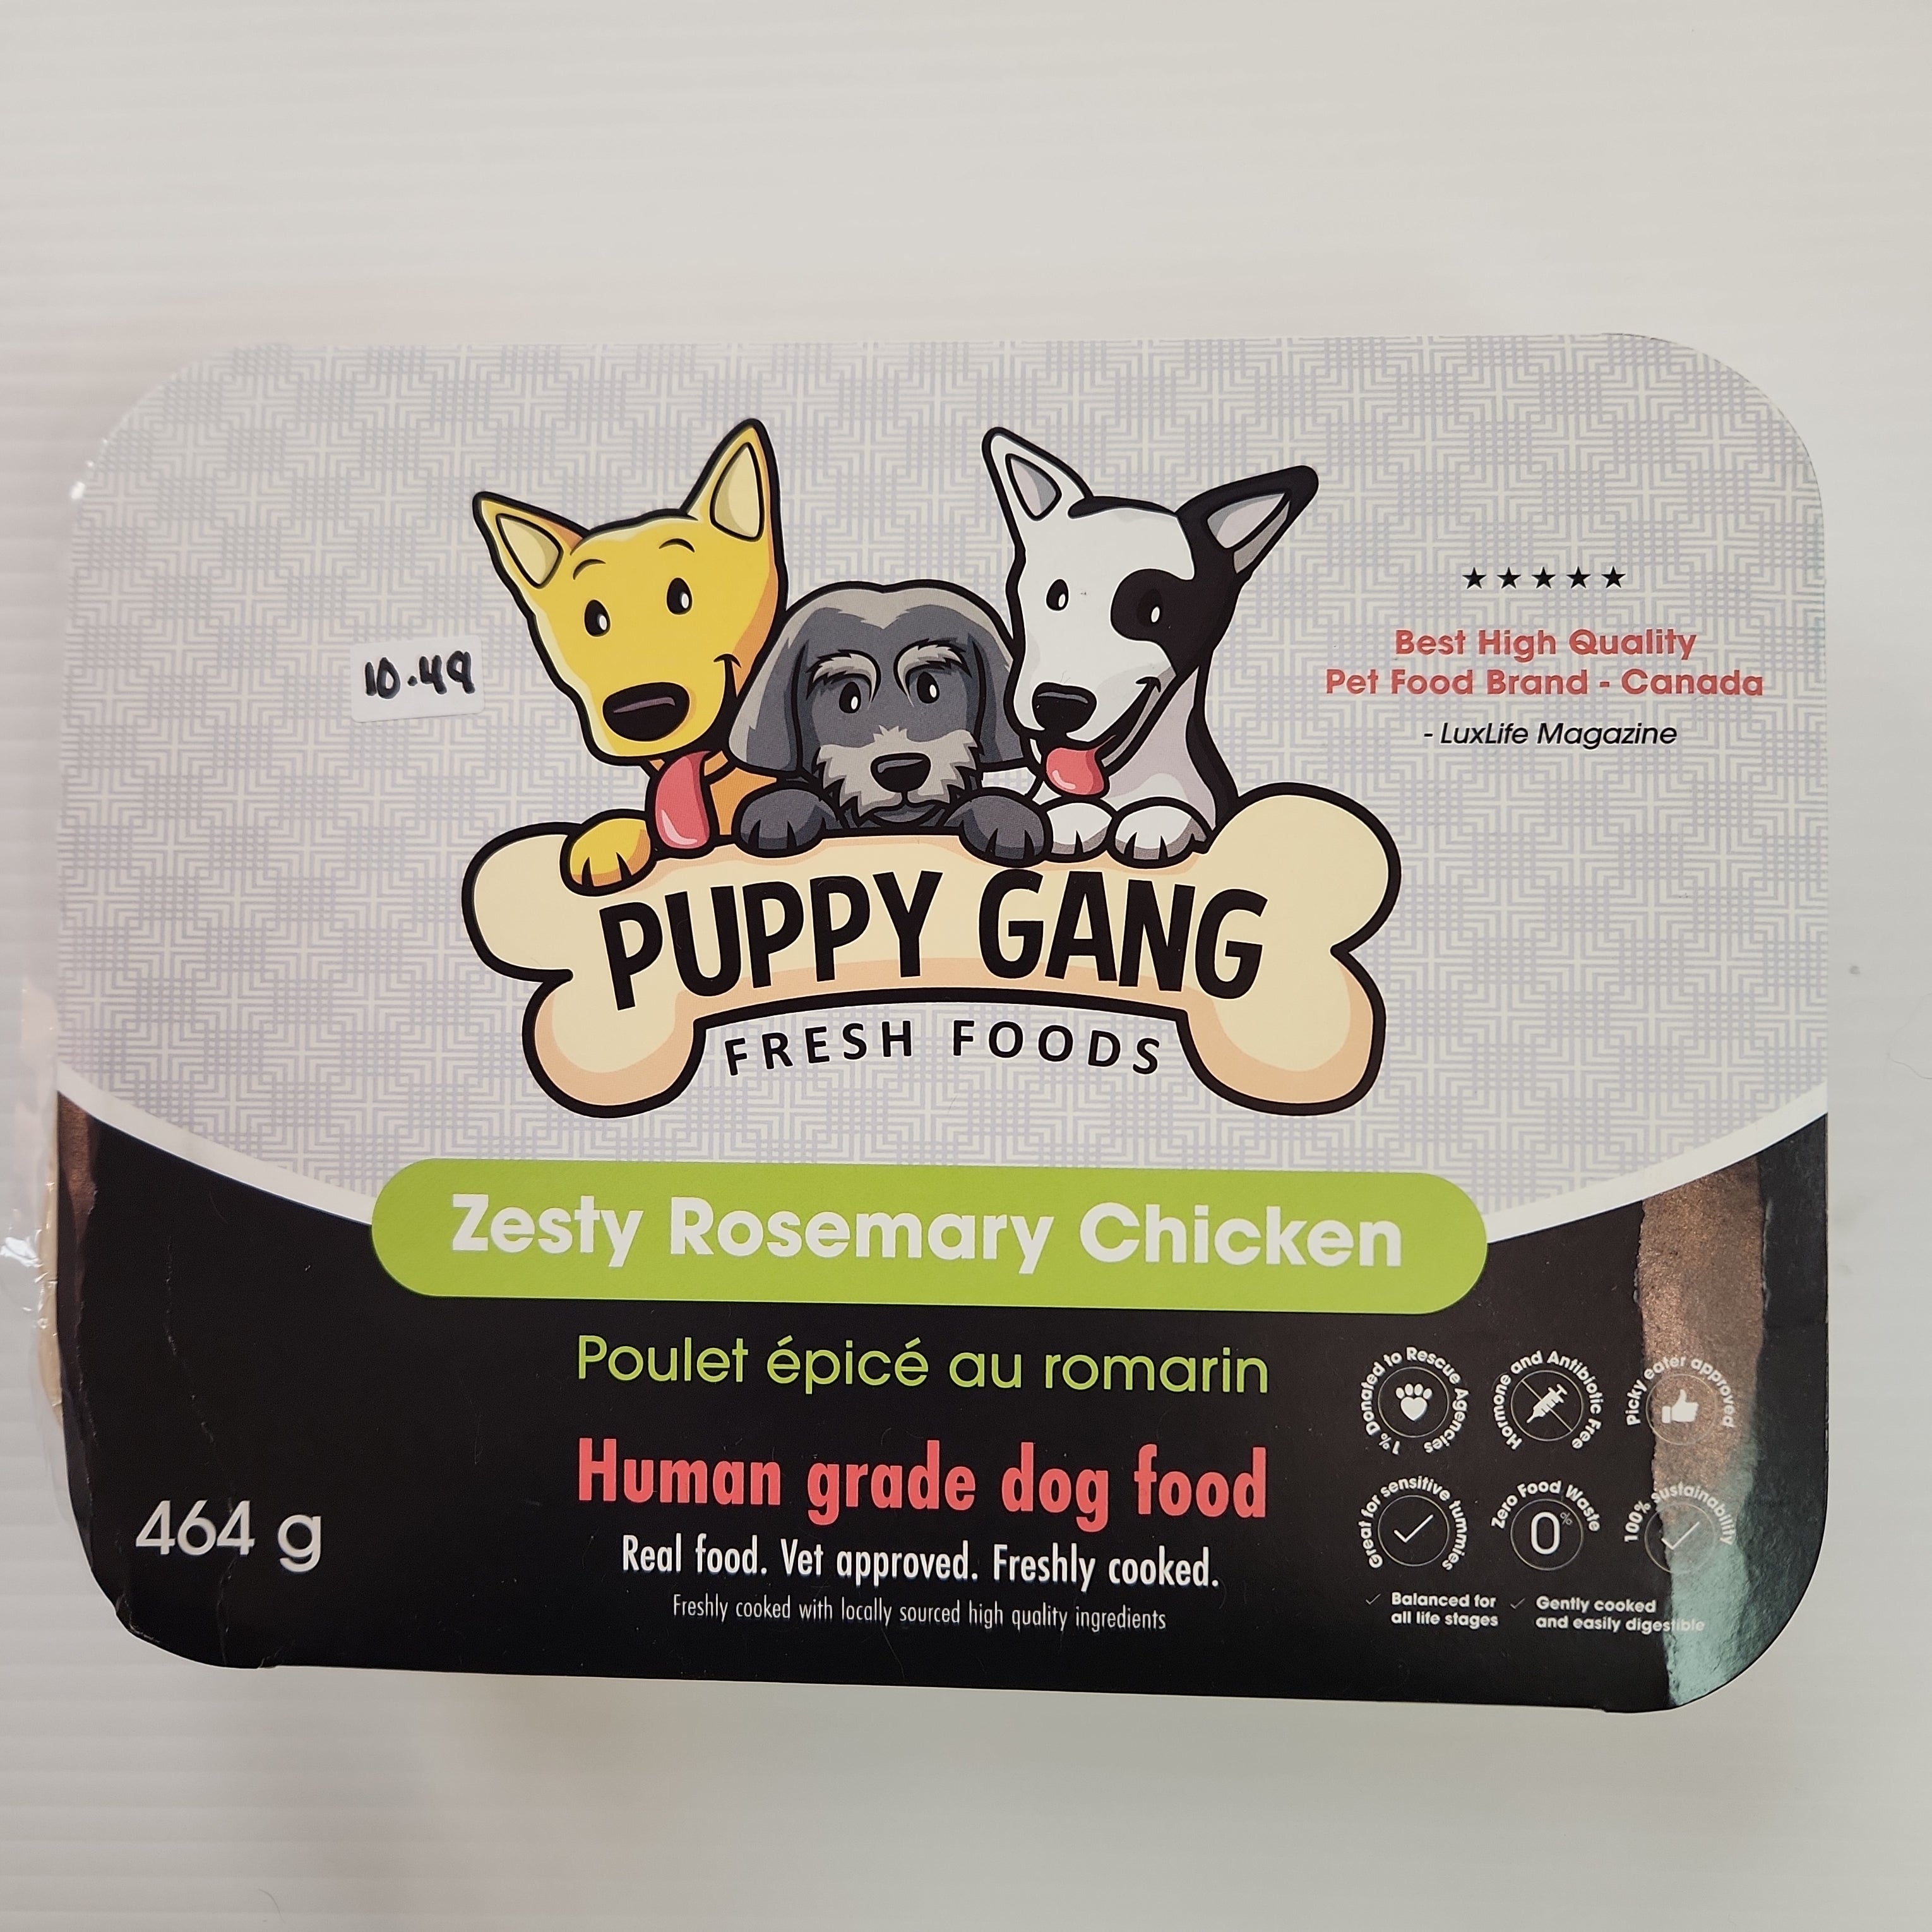 Puppy Gang Gently Cooked Fresh Frozen Dog Meals Zesty Rosemary Chicken 474g